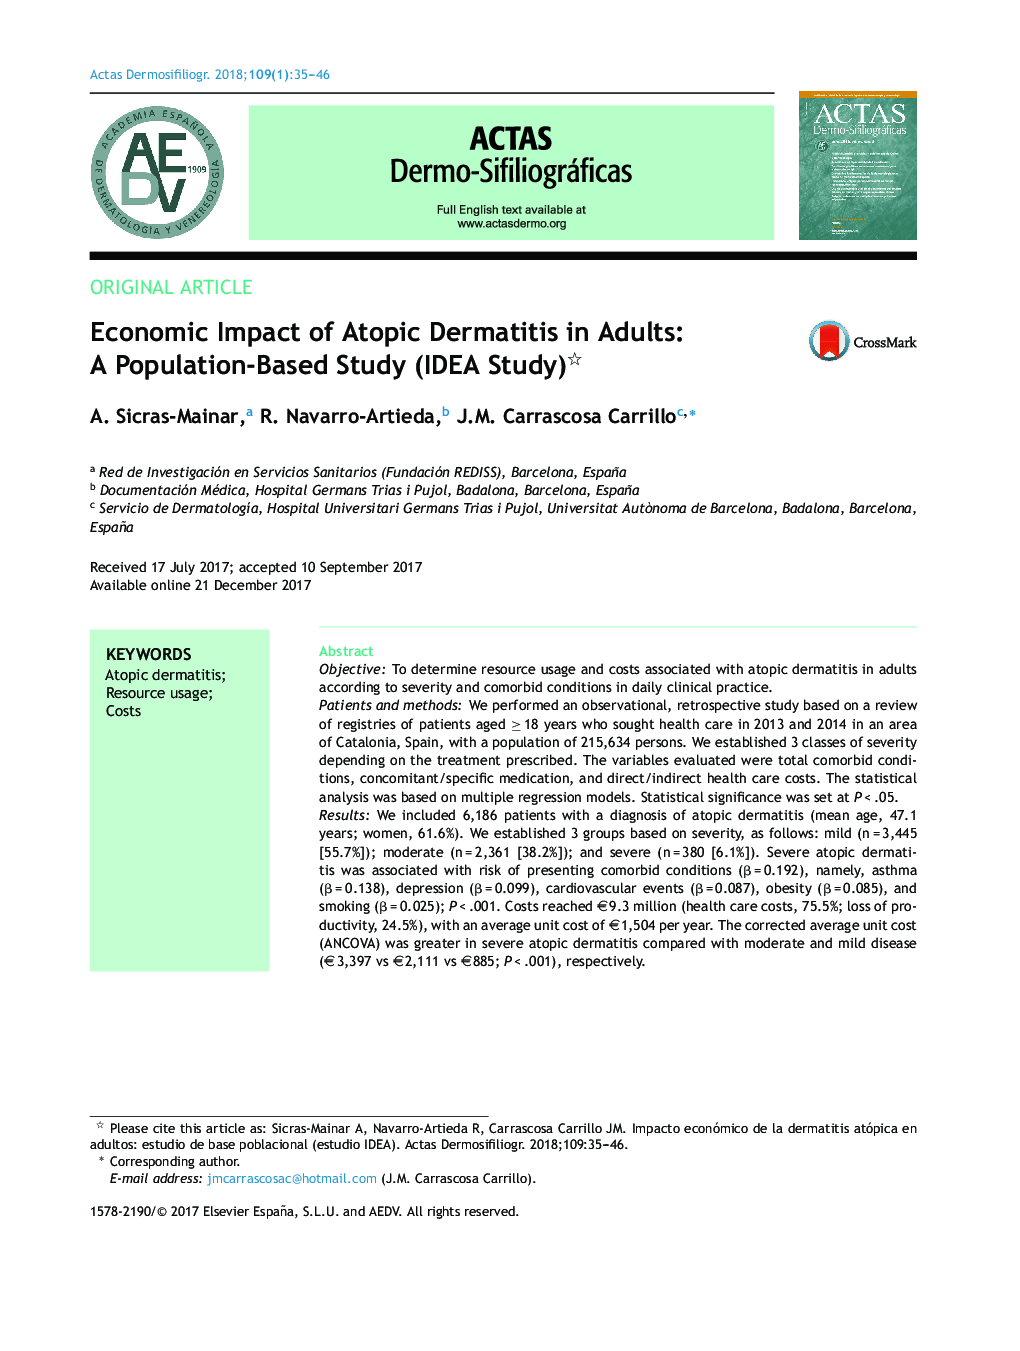 Economic Impact of Atopic Dermatitis in Adults: A Population-Based Study (IDEA Study)